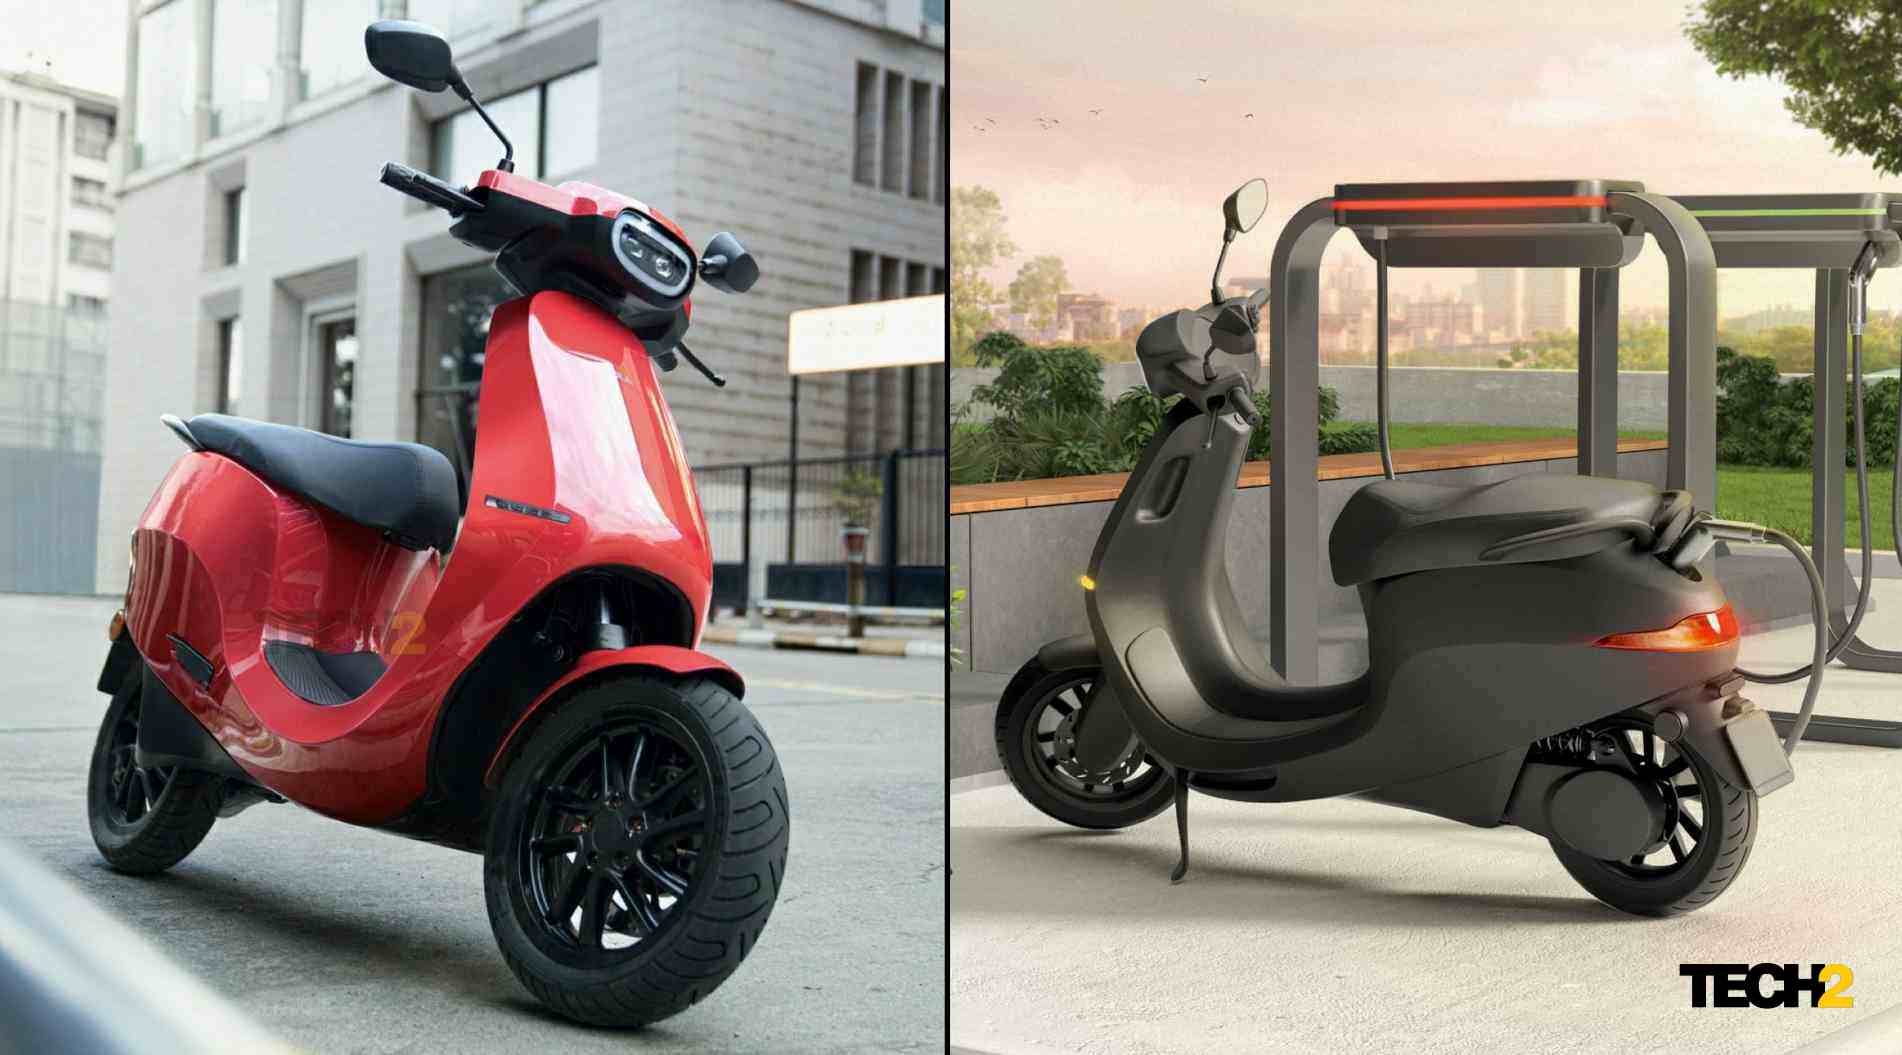 The top-spec variant of the Ola Electric scooter is set to have a real-world range of up to 150 kilometres. Image: Ola Electric